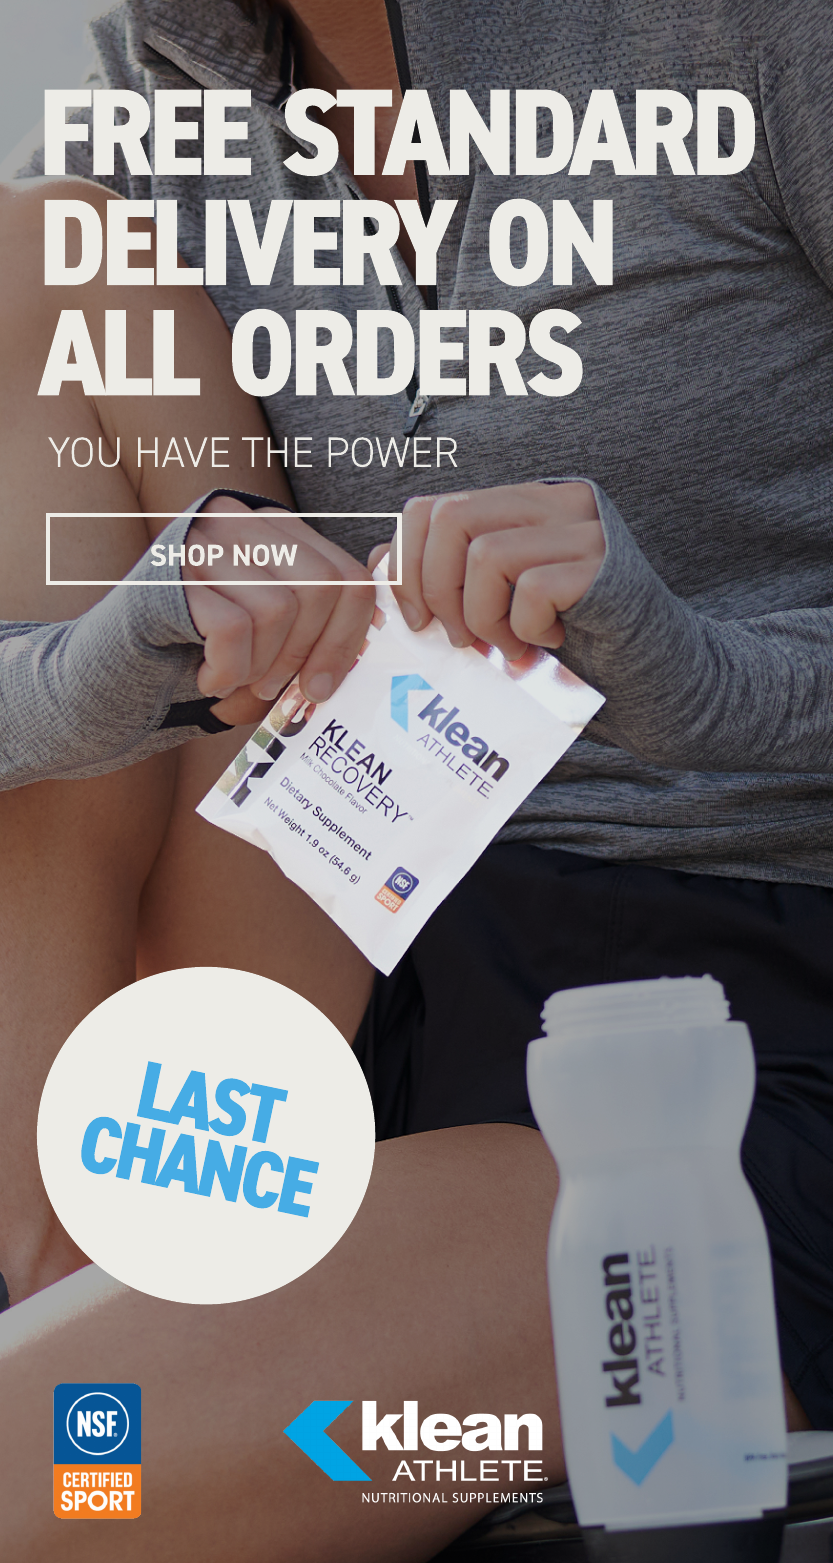 FREE DELIVERY LAST CHANCE